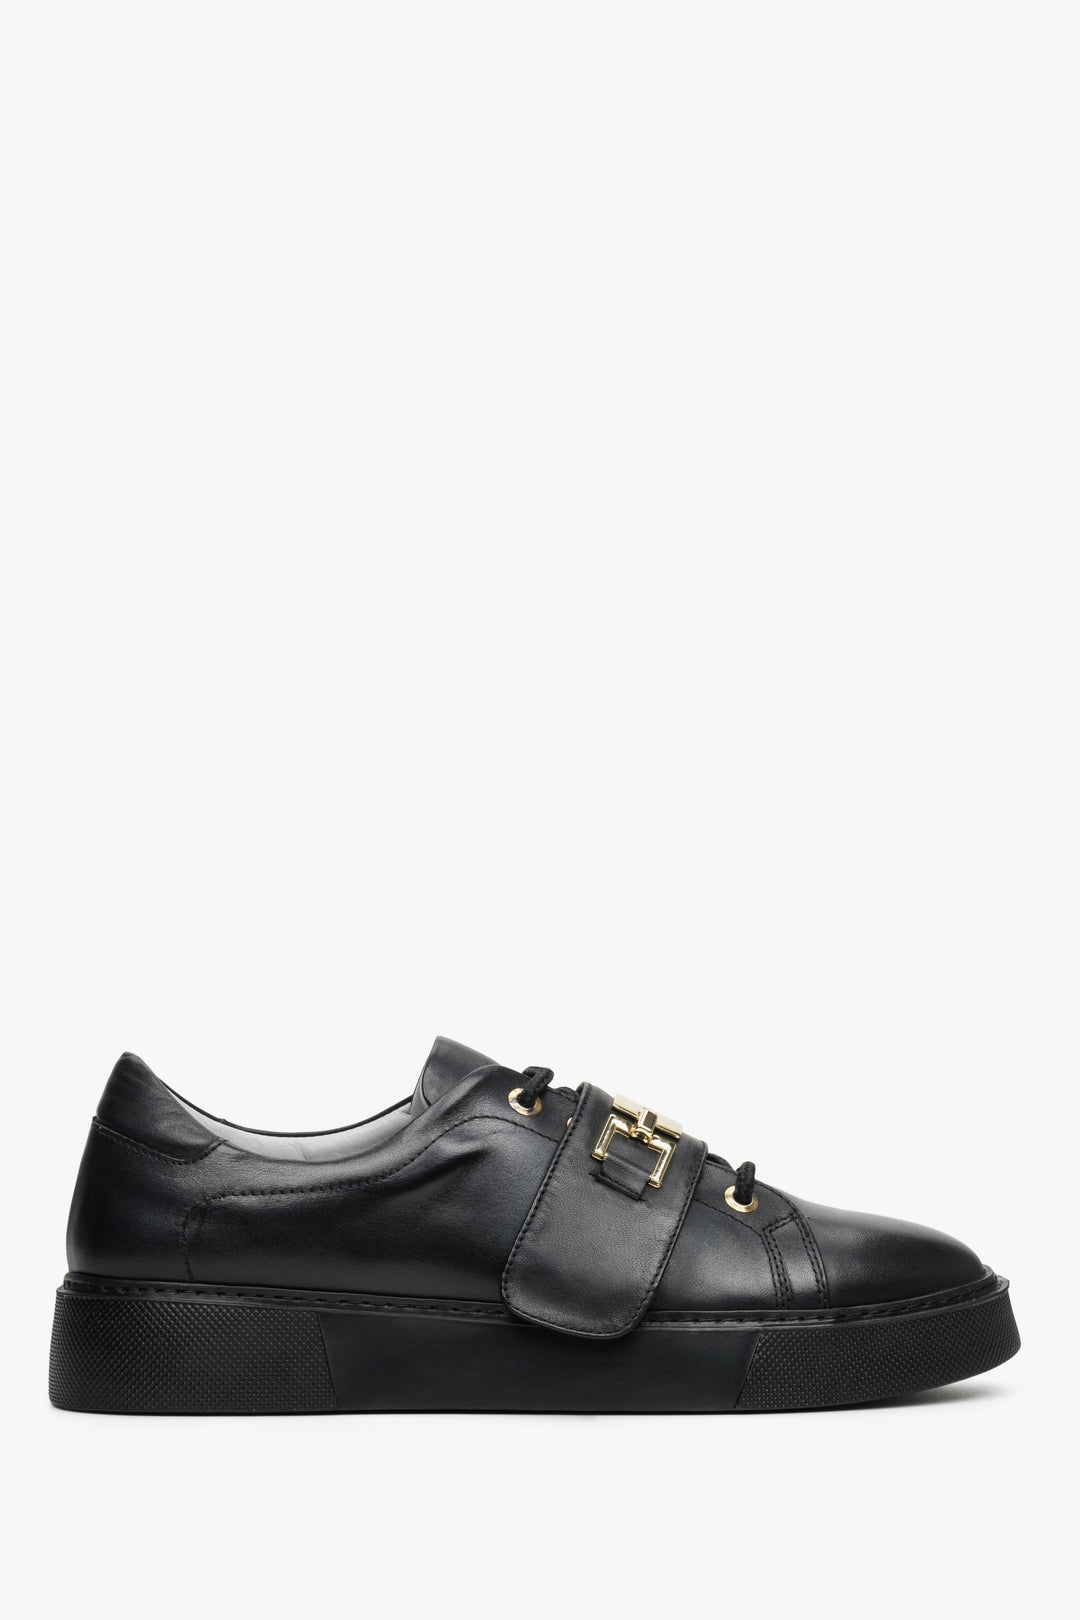 Women's black leather sneakers by Estro with a gold embellishment - shoe profile.